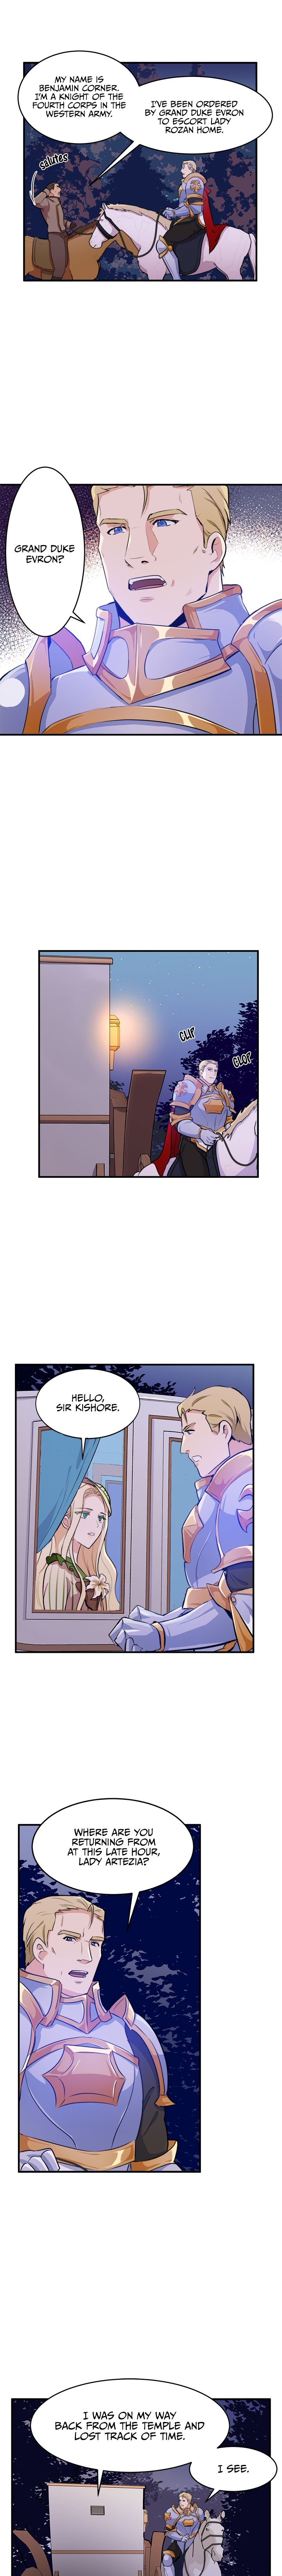 The Villainess Lives Twice - Chapter 8 Page 9